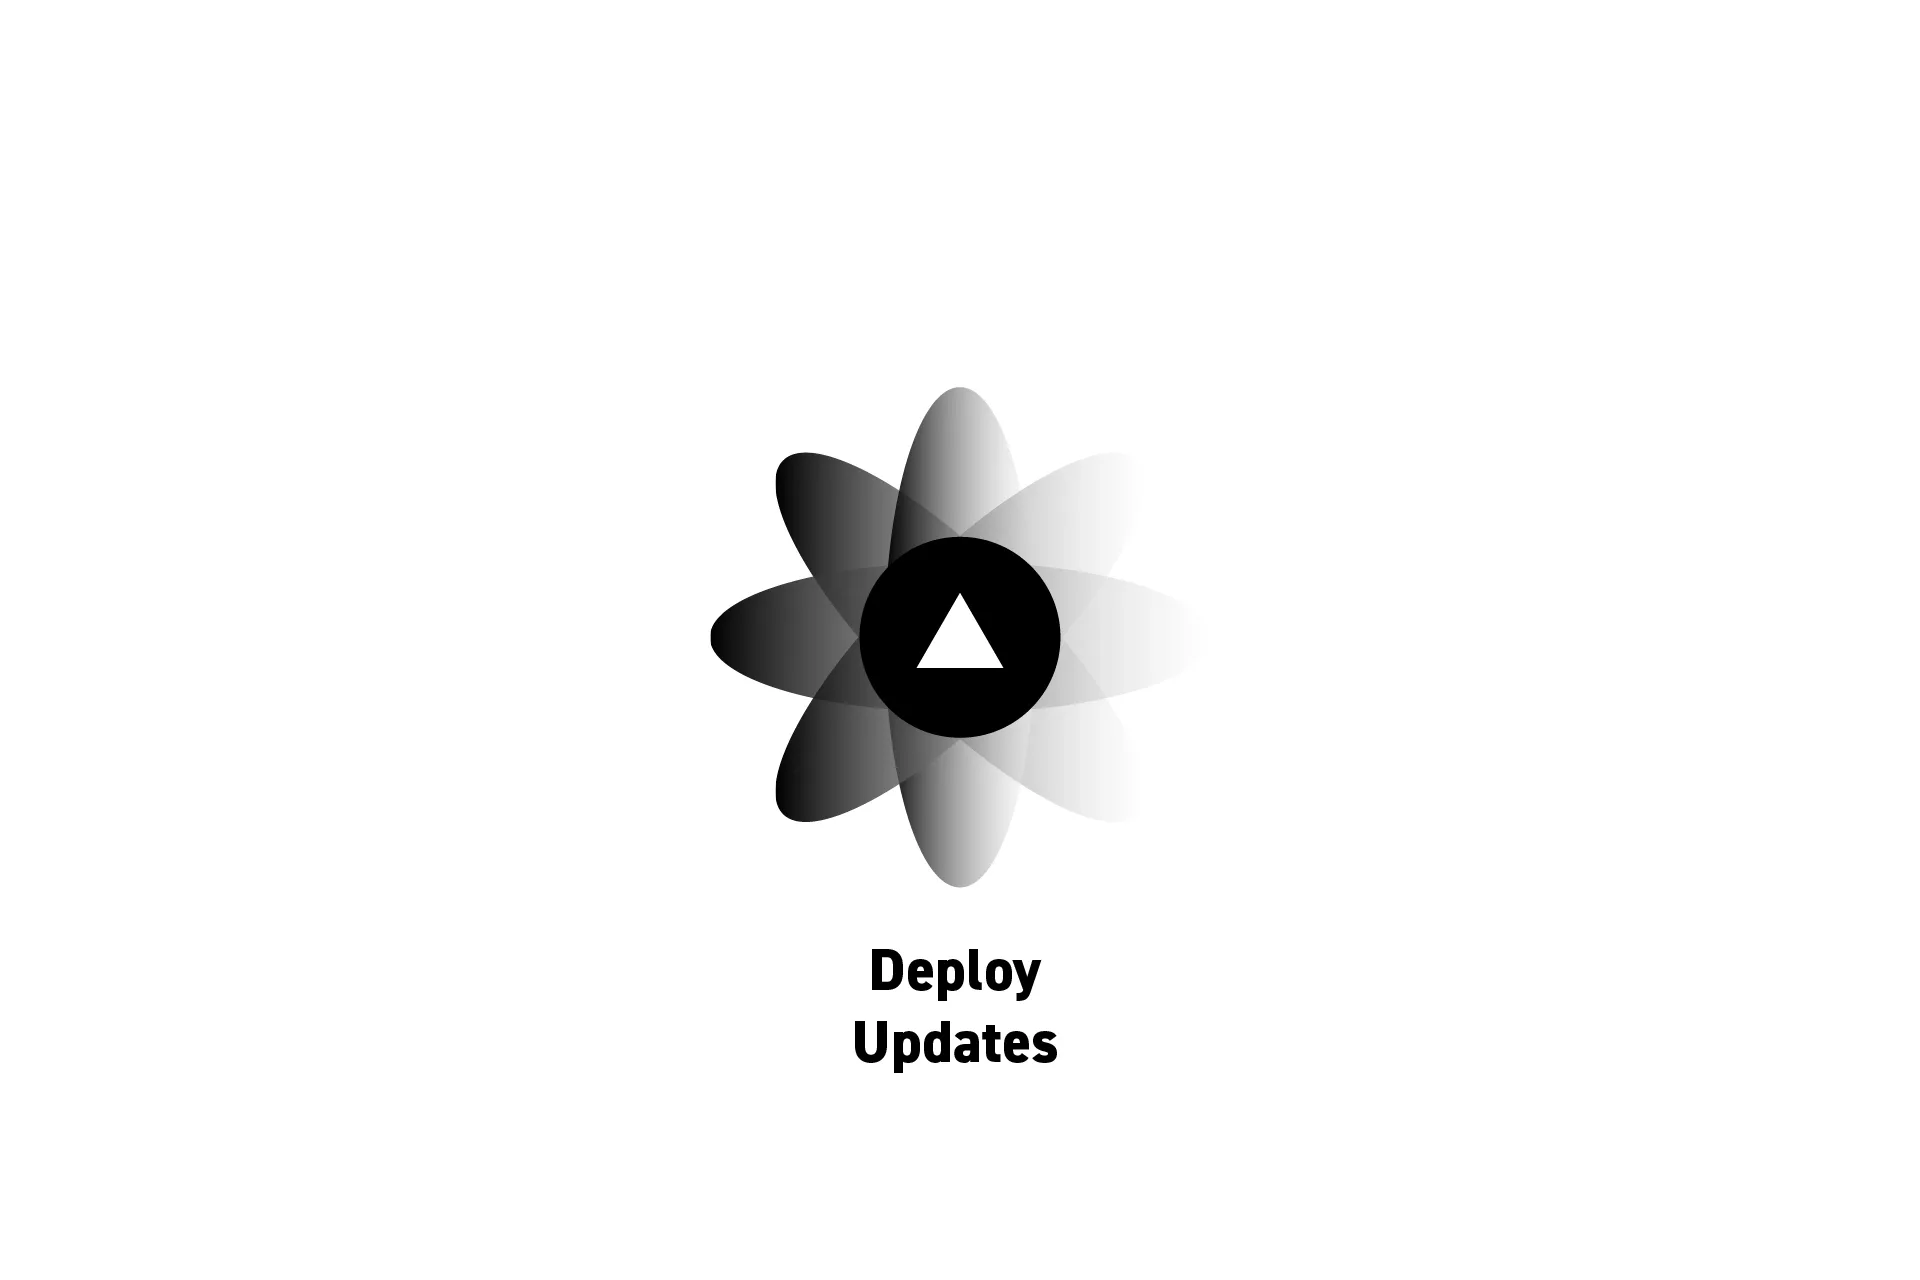 A flower that represents Vercel with the text "Deploy Updates” beneath it.